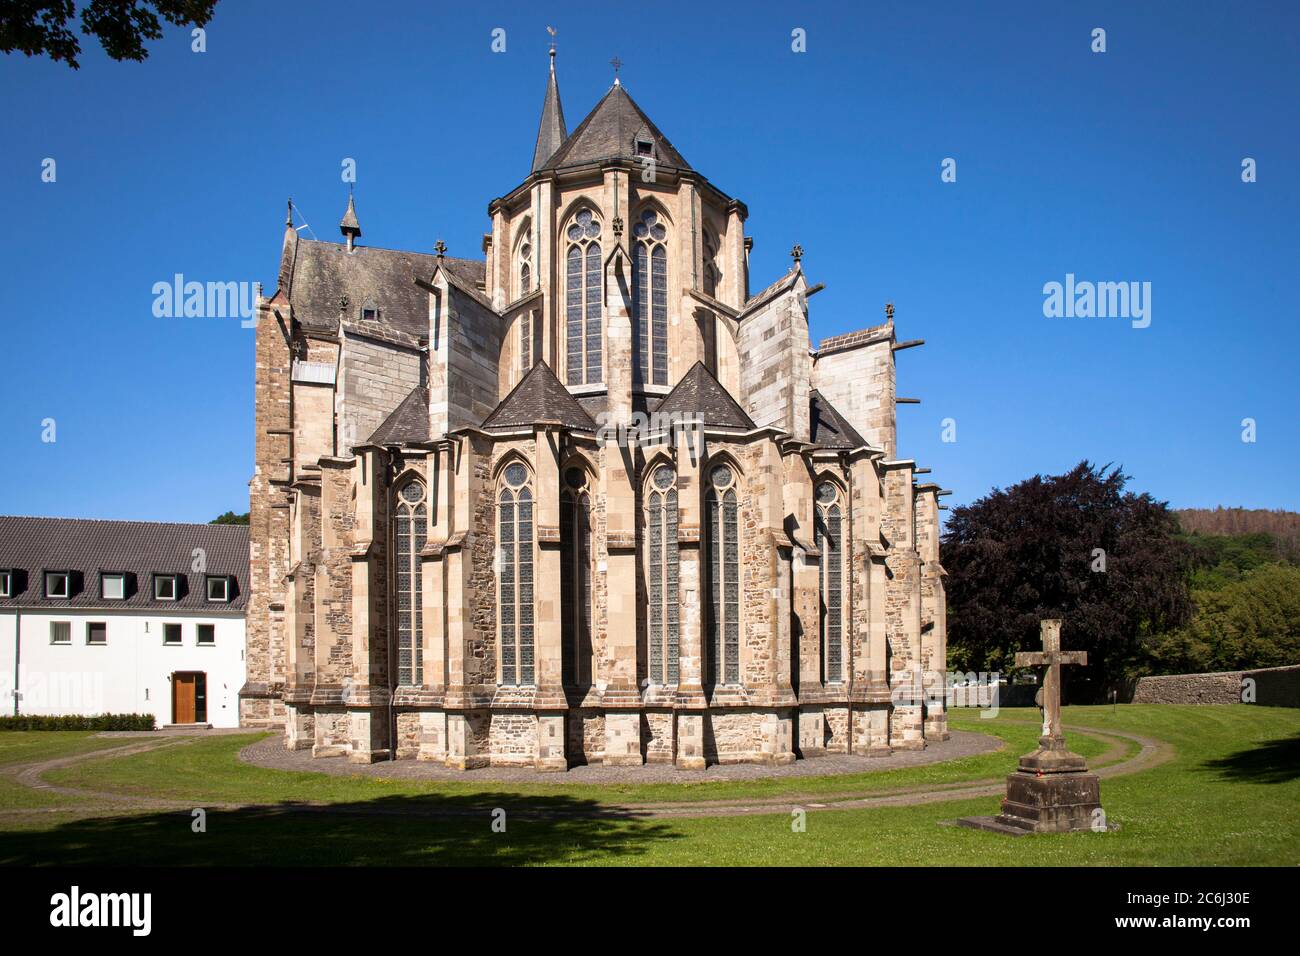 the Altenberg cathedral in Odenthal, Church of the former Cistercian abbey Altenberg, the Bergisches Land region, North Rhine-Westphalia, Germany.  de Stock Photo